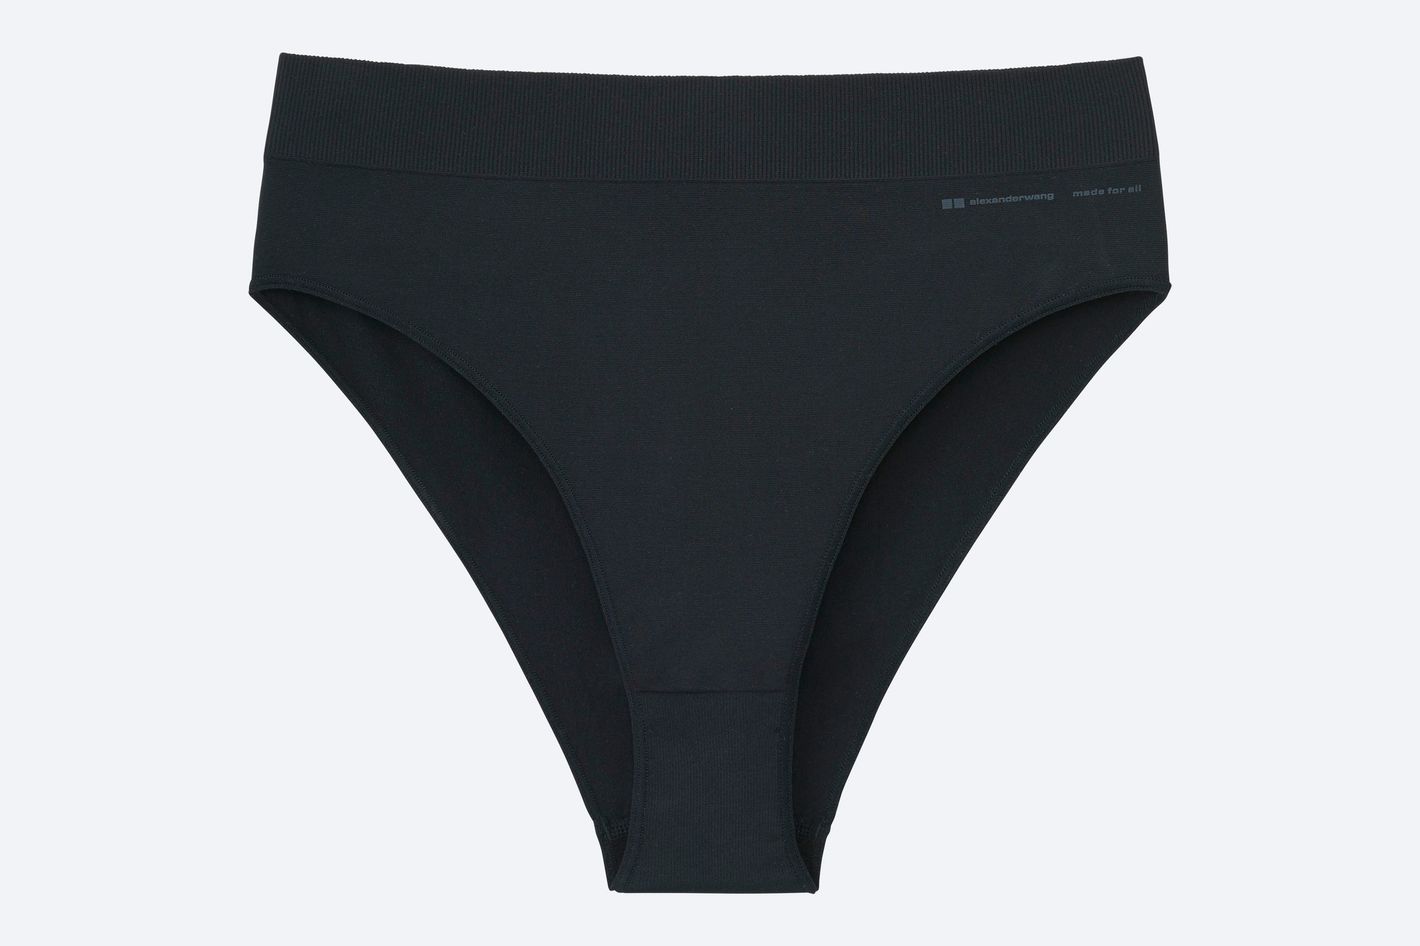 Alexander Wang Makes Cooling Underwear for Uniqlo